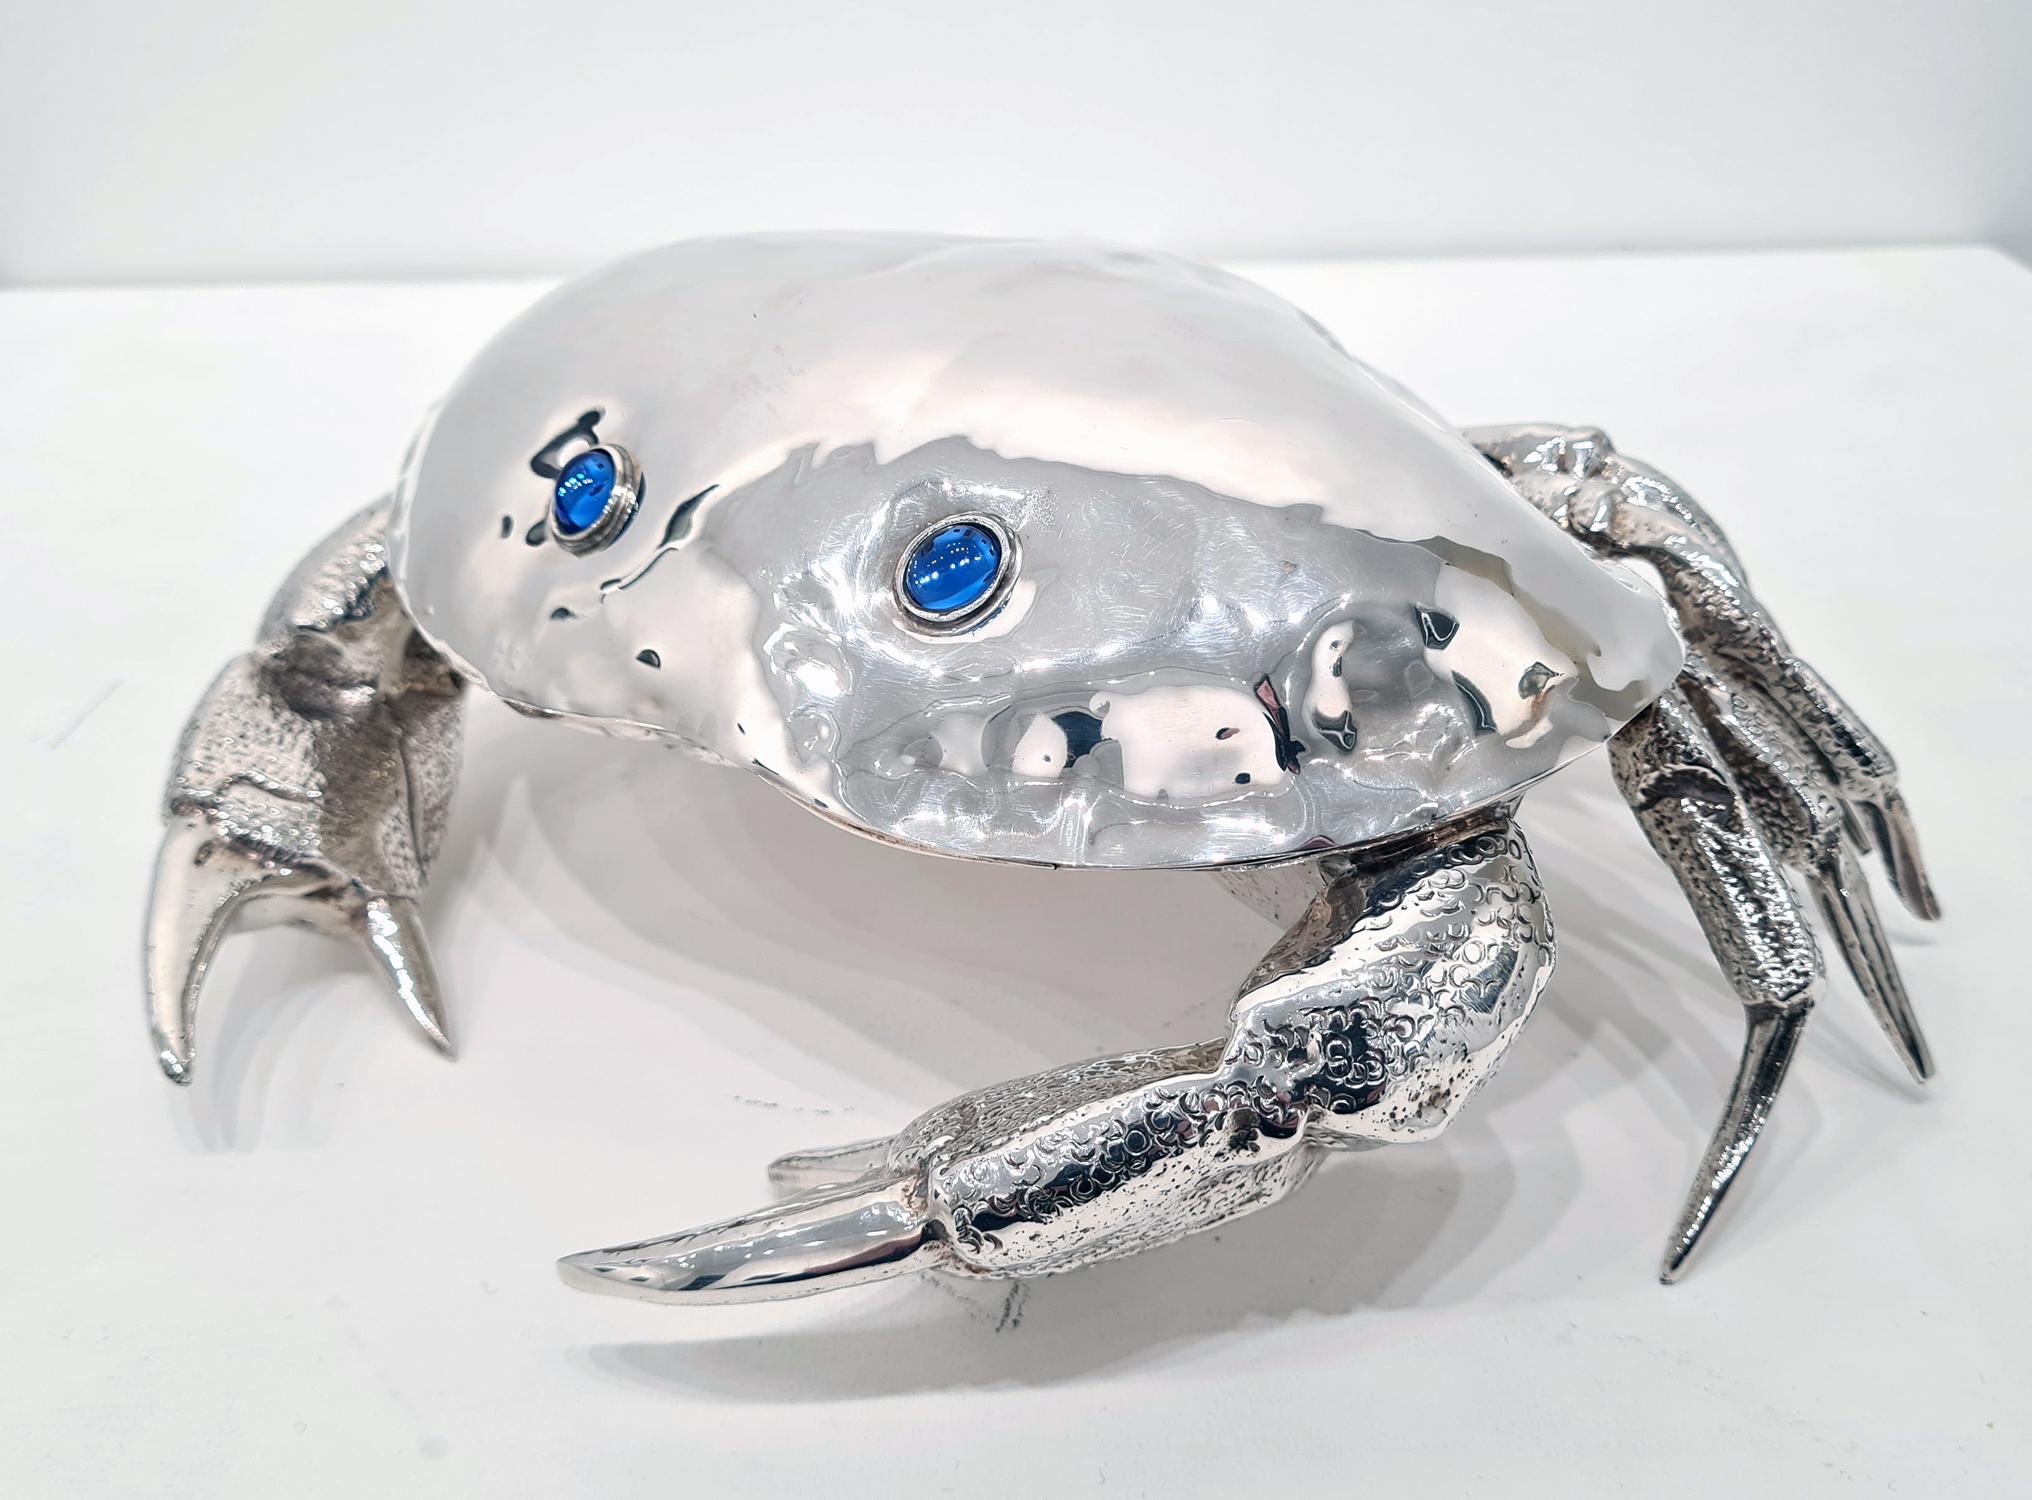 Mid-Century Modern Vintage Silver Plated Caviar Dish in the Shape of a Crab, c. 1970  For Sale